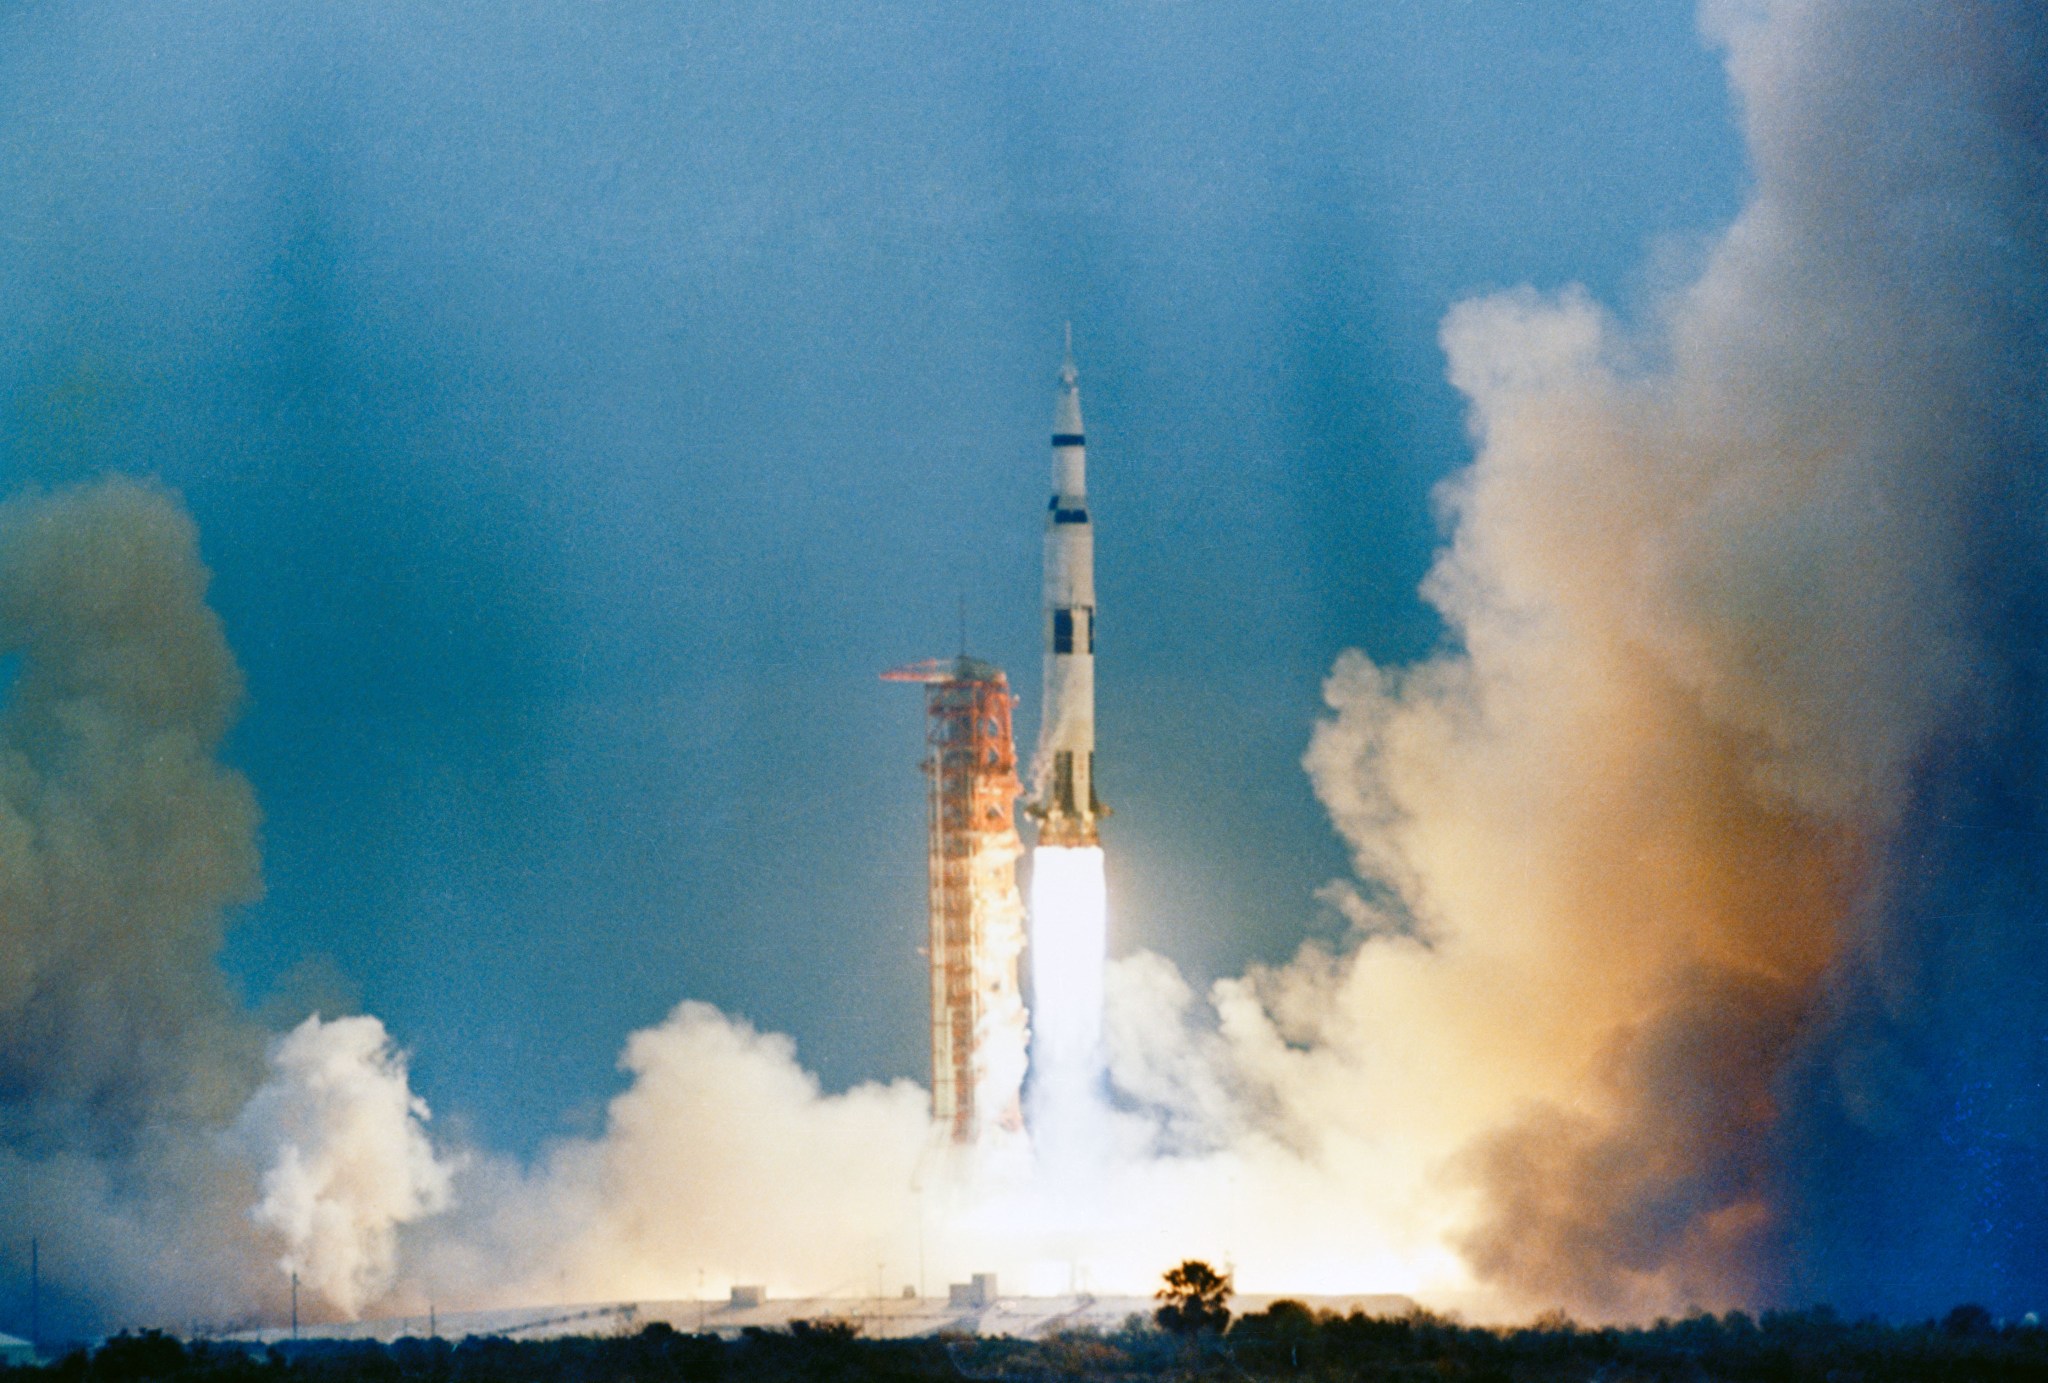 This week in 1969, Apollo 9 launched from NASA’s Kennedy Space Center.